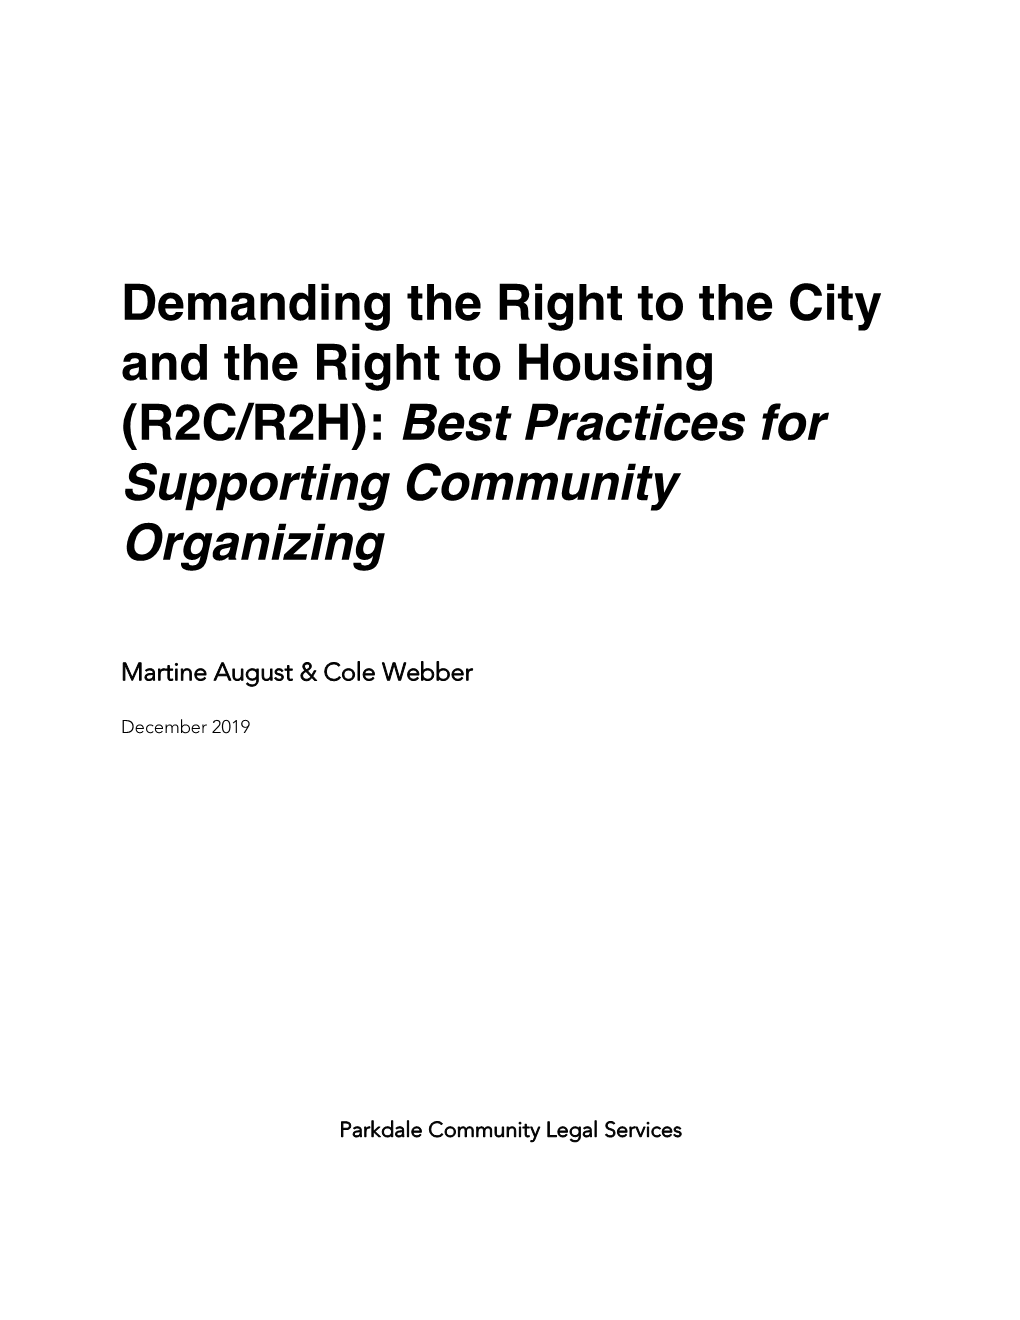 Demanding the Right to the City and the Right to Housing (R2C/R2H): Best Practices for Supporting Community Organizing